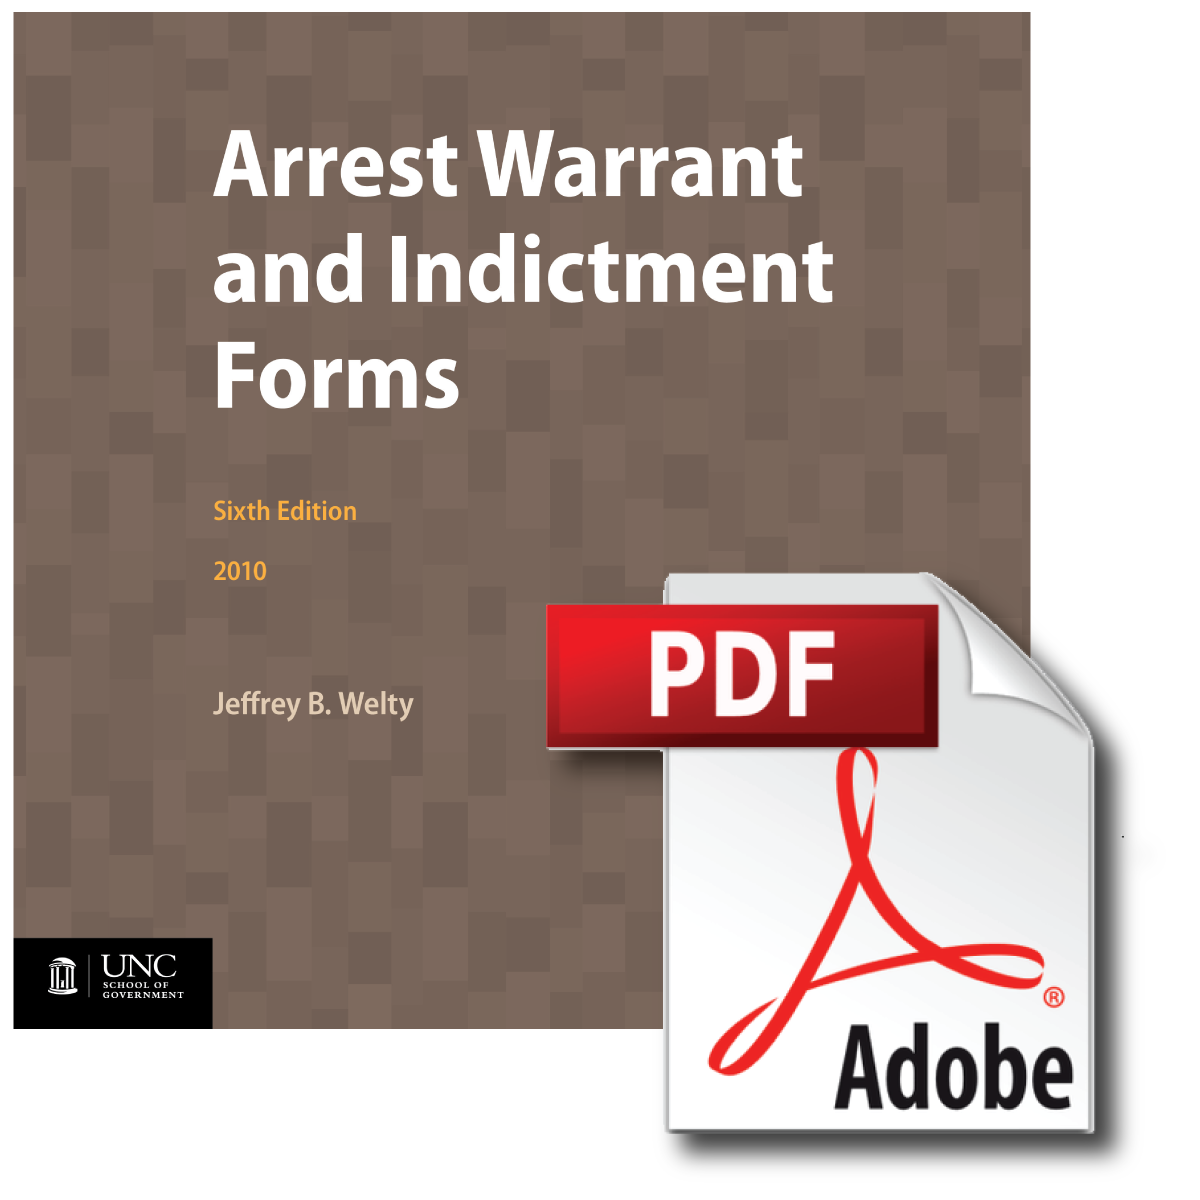 Cover image for 2014 Update to Arrest Warrant and Indictment Forms, Sixth Edition, 2010 (Free PDF)